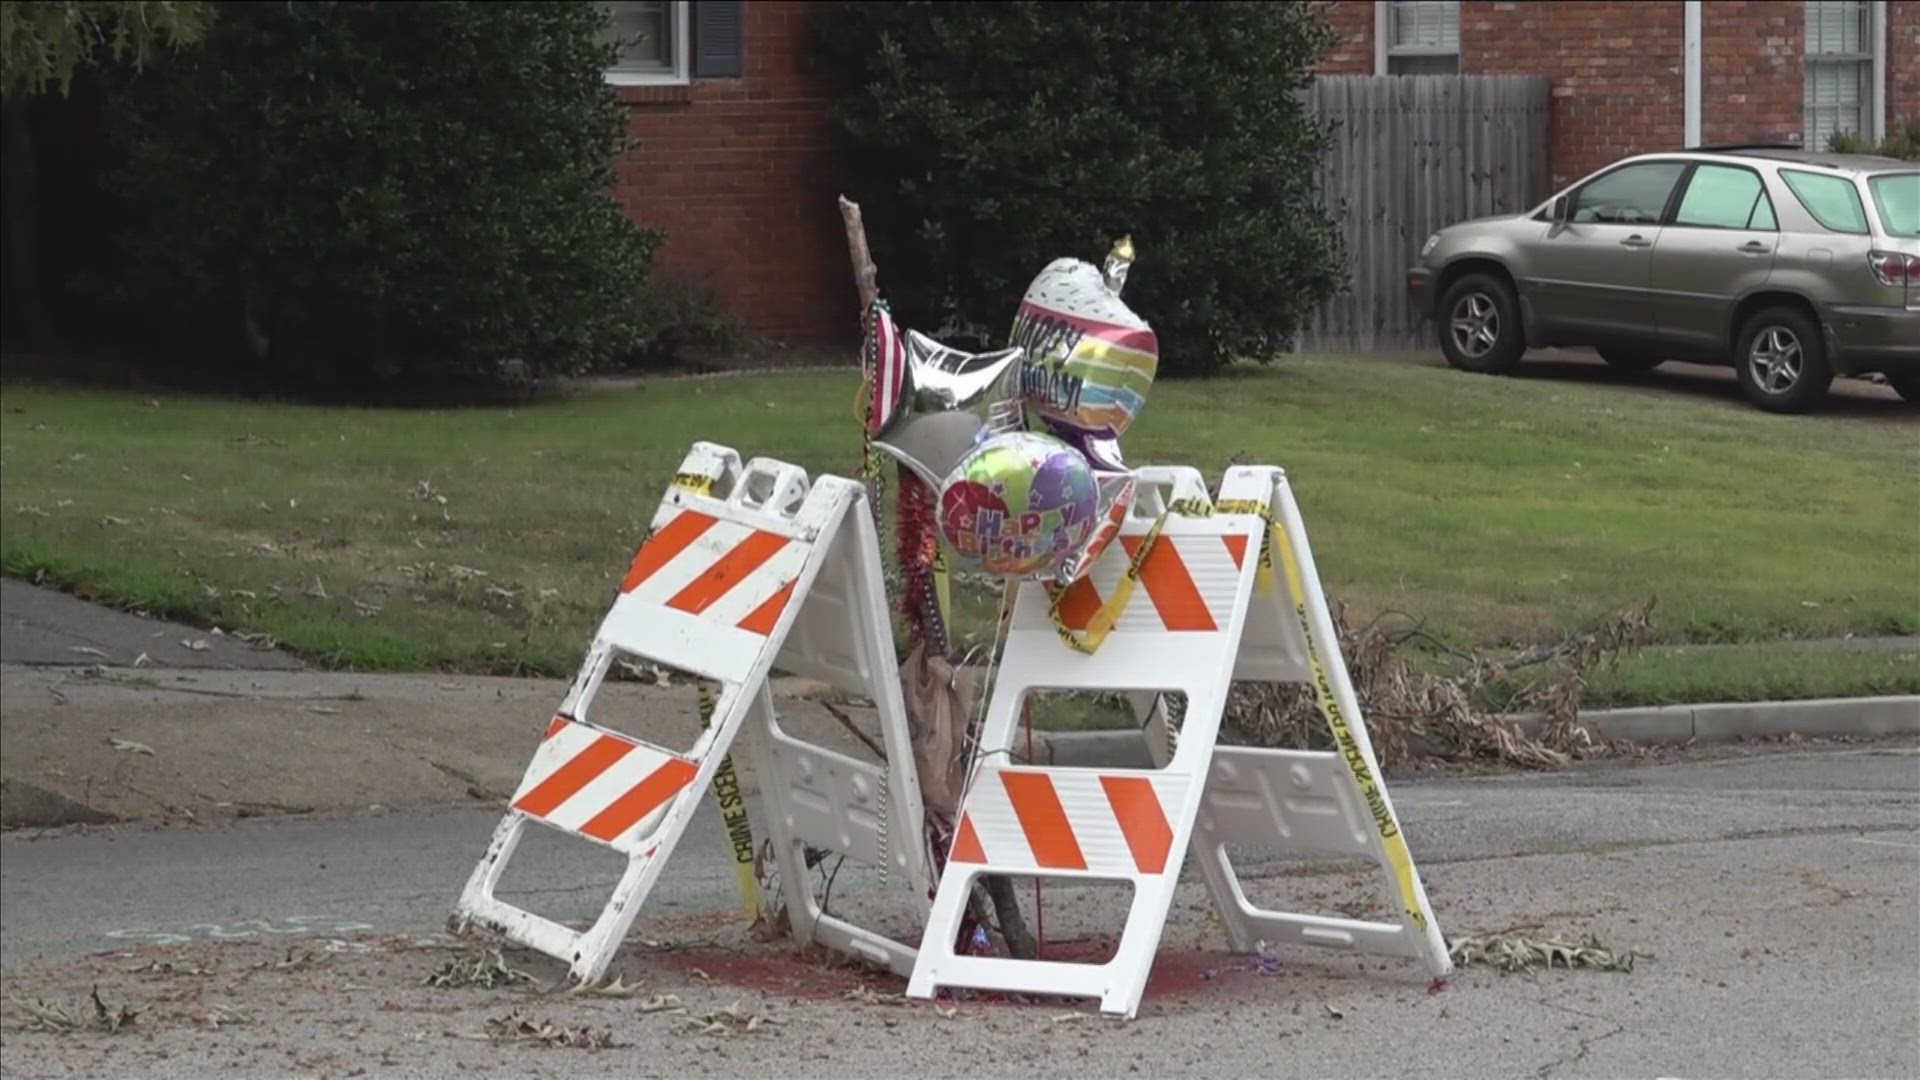 A neighborhood in white station is celebrating the birthday of a nuisance.